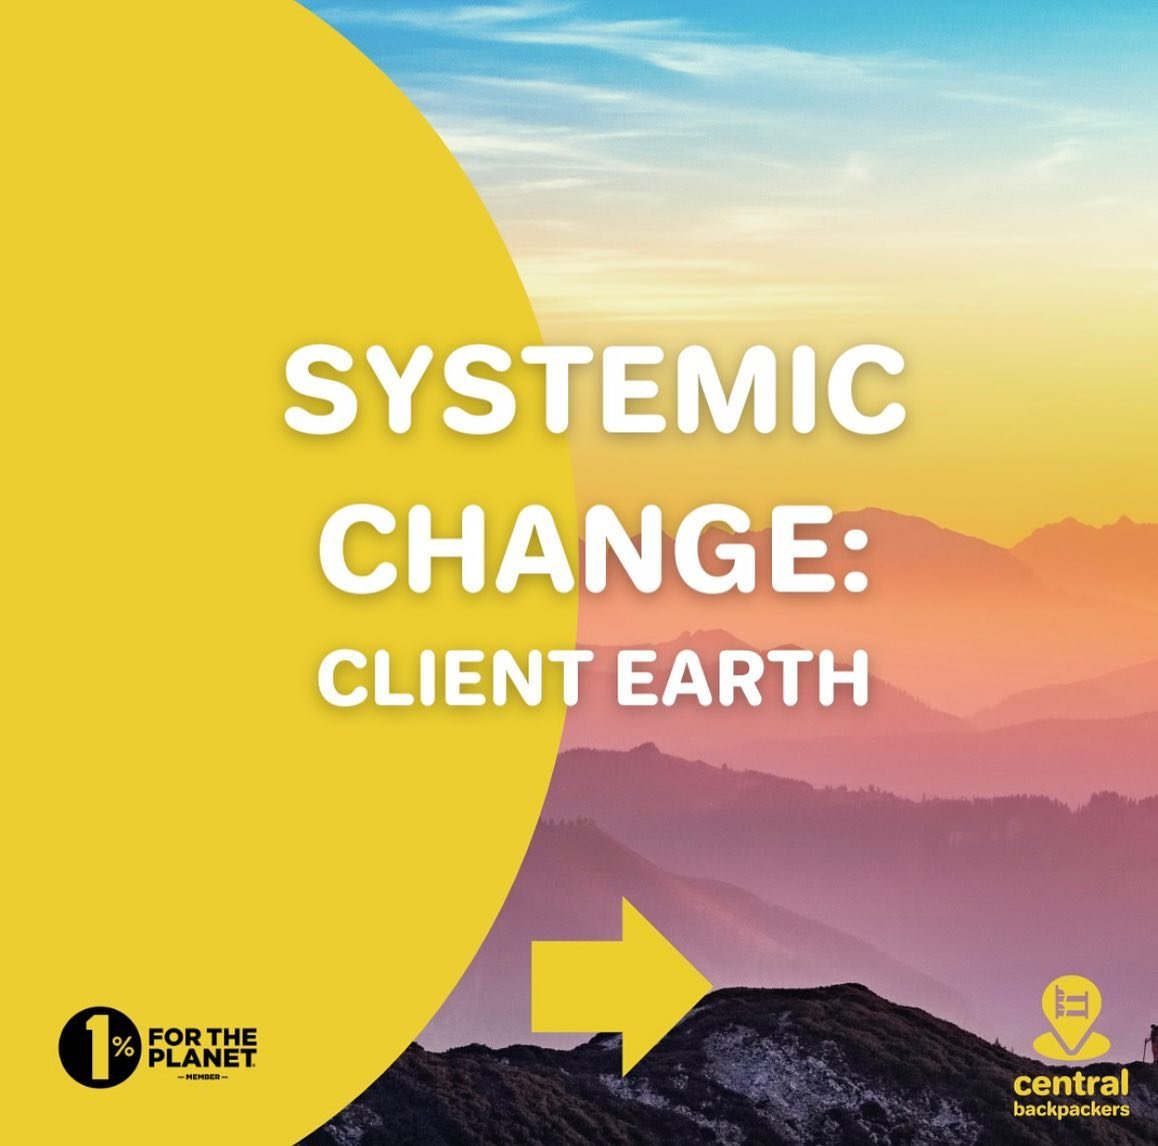 Fighting climate change as an individual can often feel hopeless. This is why we chose to donate to ClientEarth. @clientearth_  is a highly impactful organization that focuses on fighting climate change at a systemic level. The way they do this is by